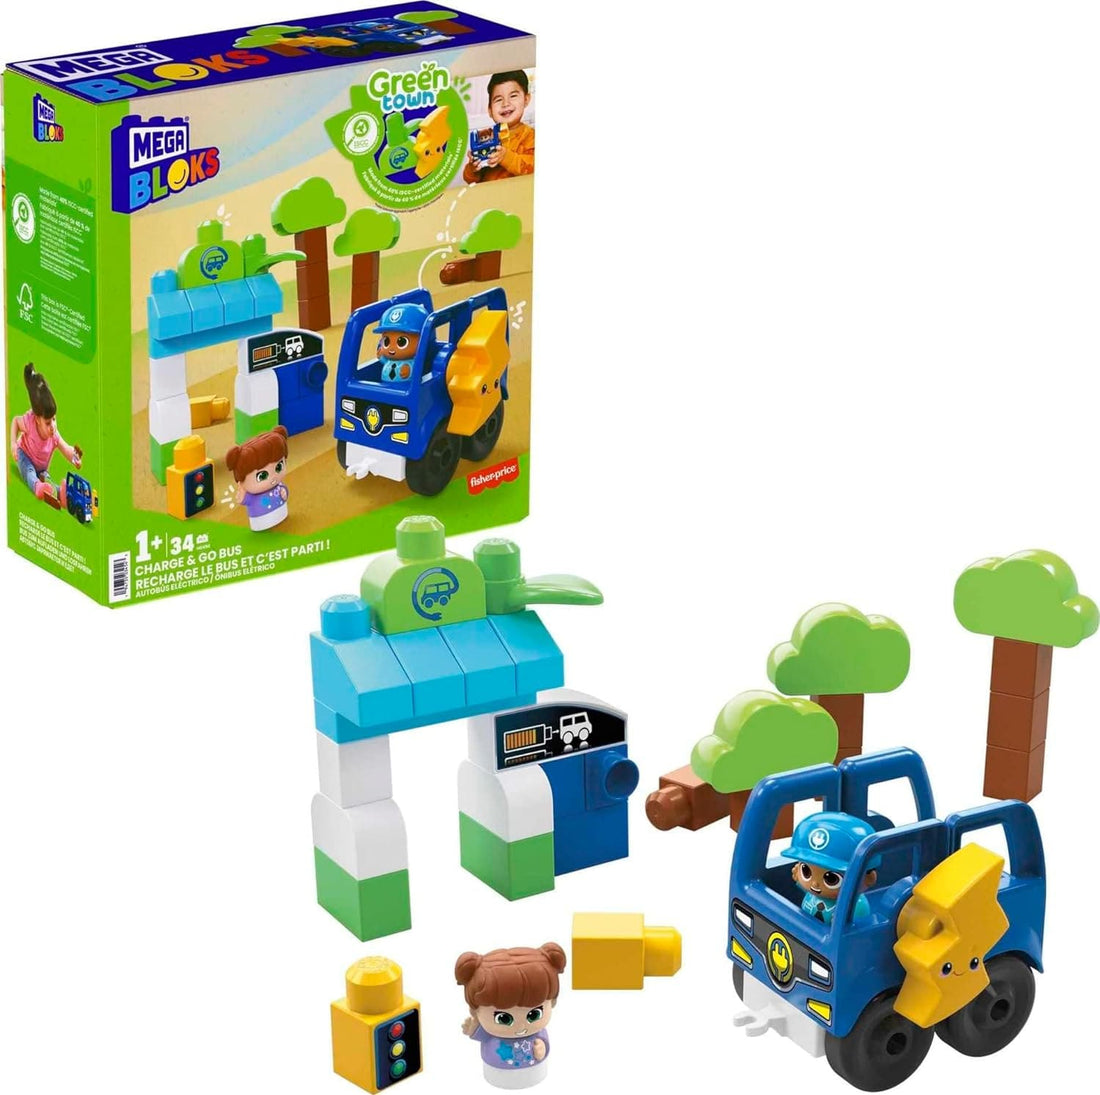 MEGA BLOKS Fisher Price Toddler Building Blocks, Green Town Charge & Go Bus with 2 Figures - best price from Maltashopper.com HDX90